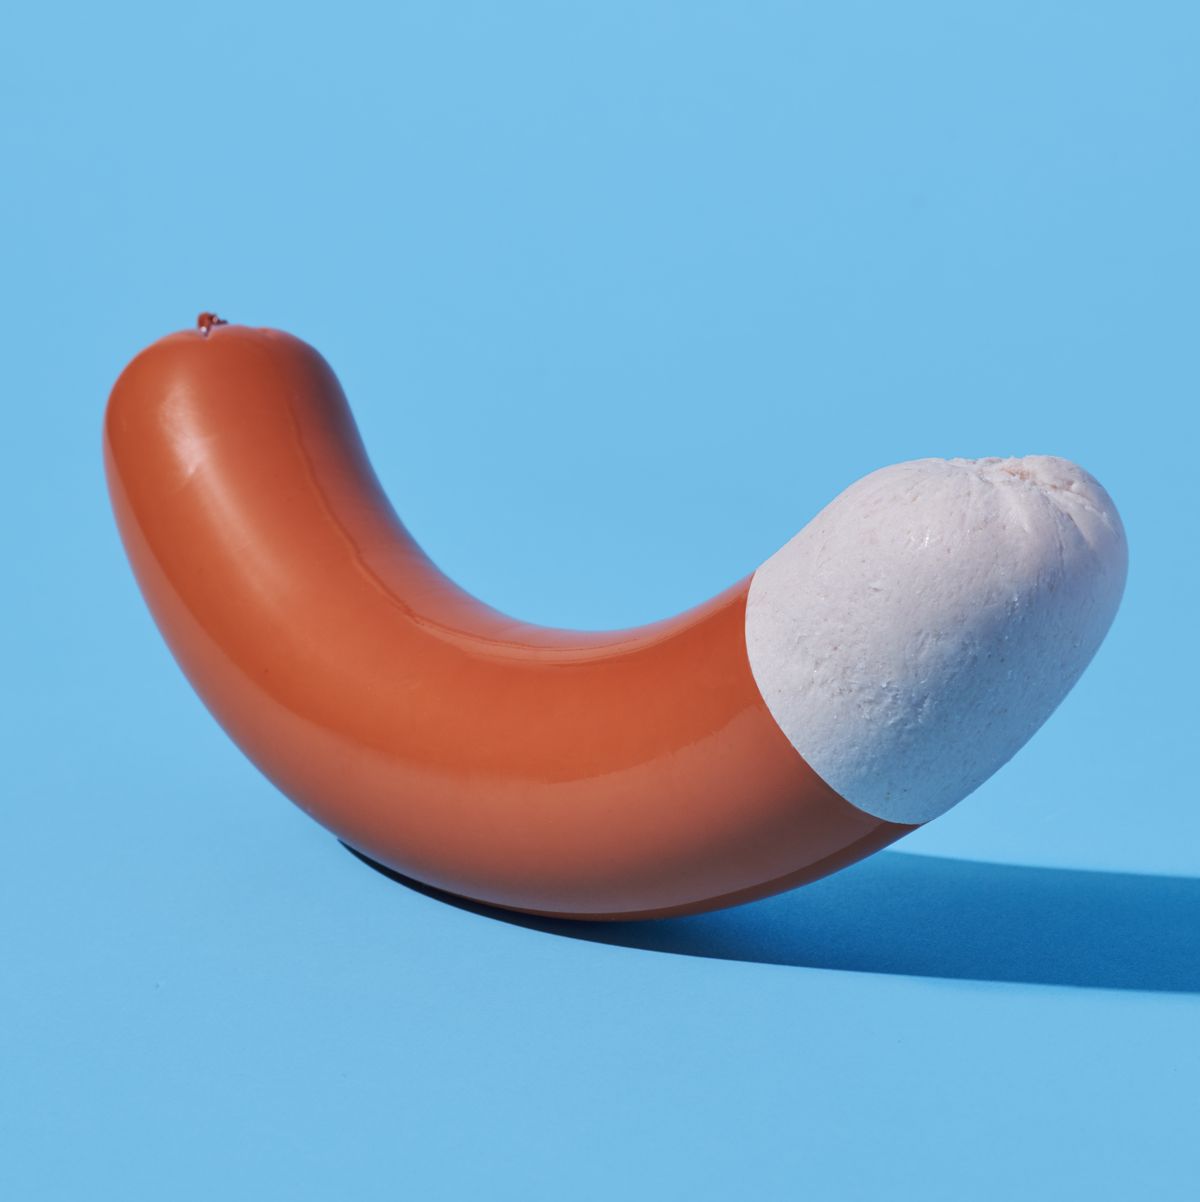 Everything You Need to Know About Your Penis